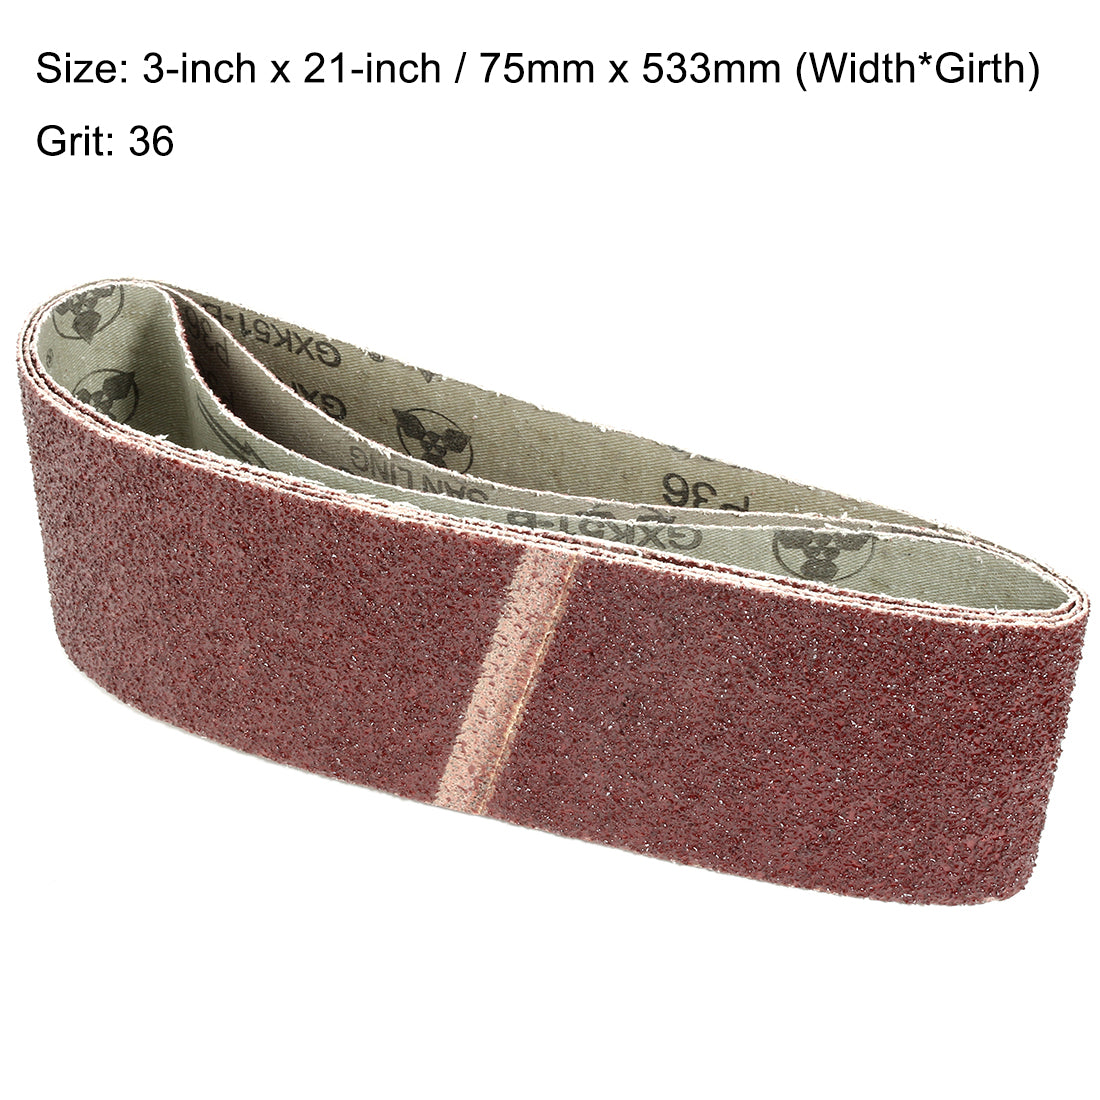 uxcell Uxcell 3-Inch x 21-Inch Aluminum Oxide Sanding Belt 36 Grits Lapped Joint 3pcs